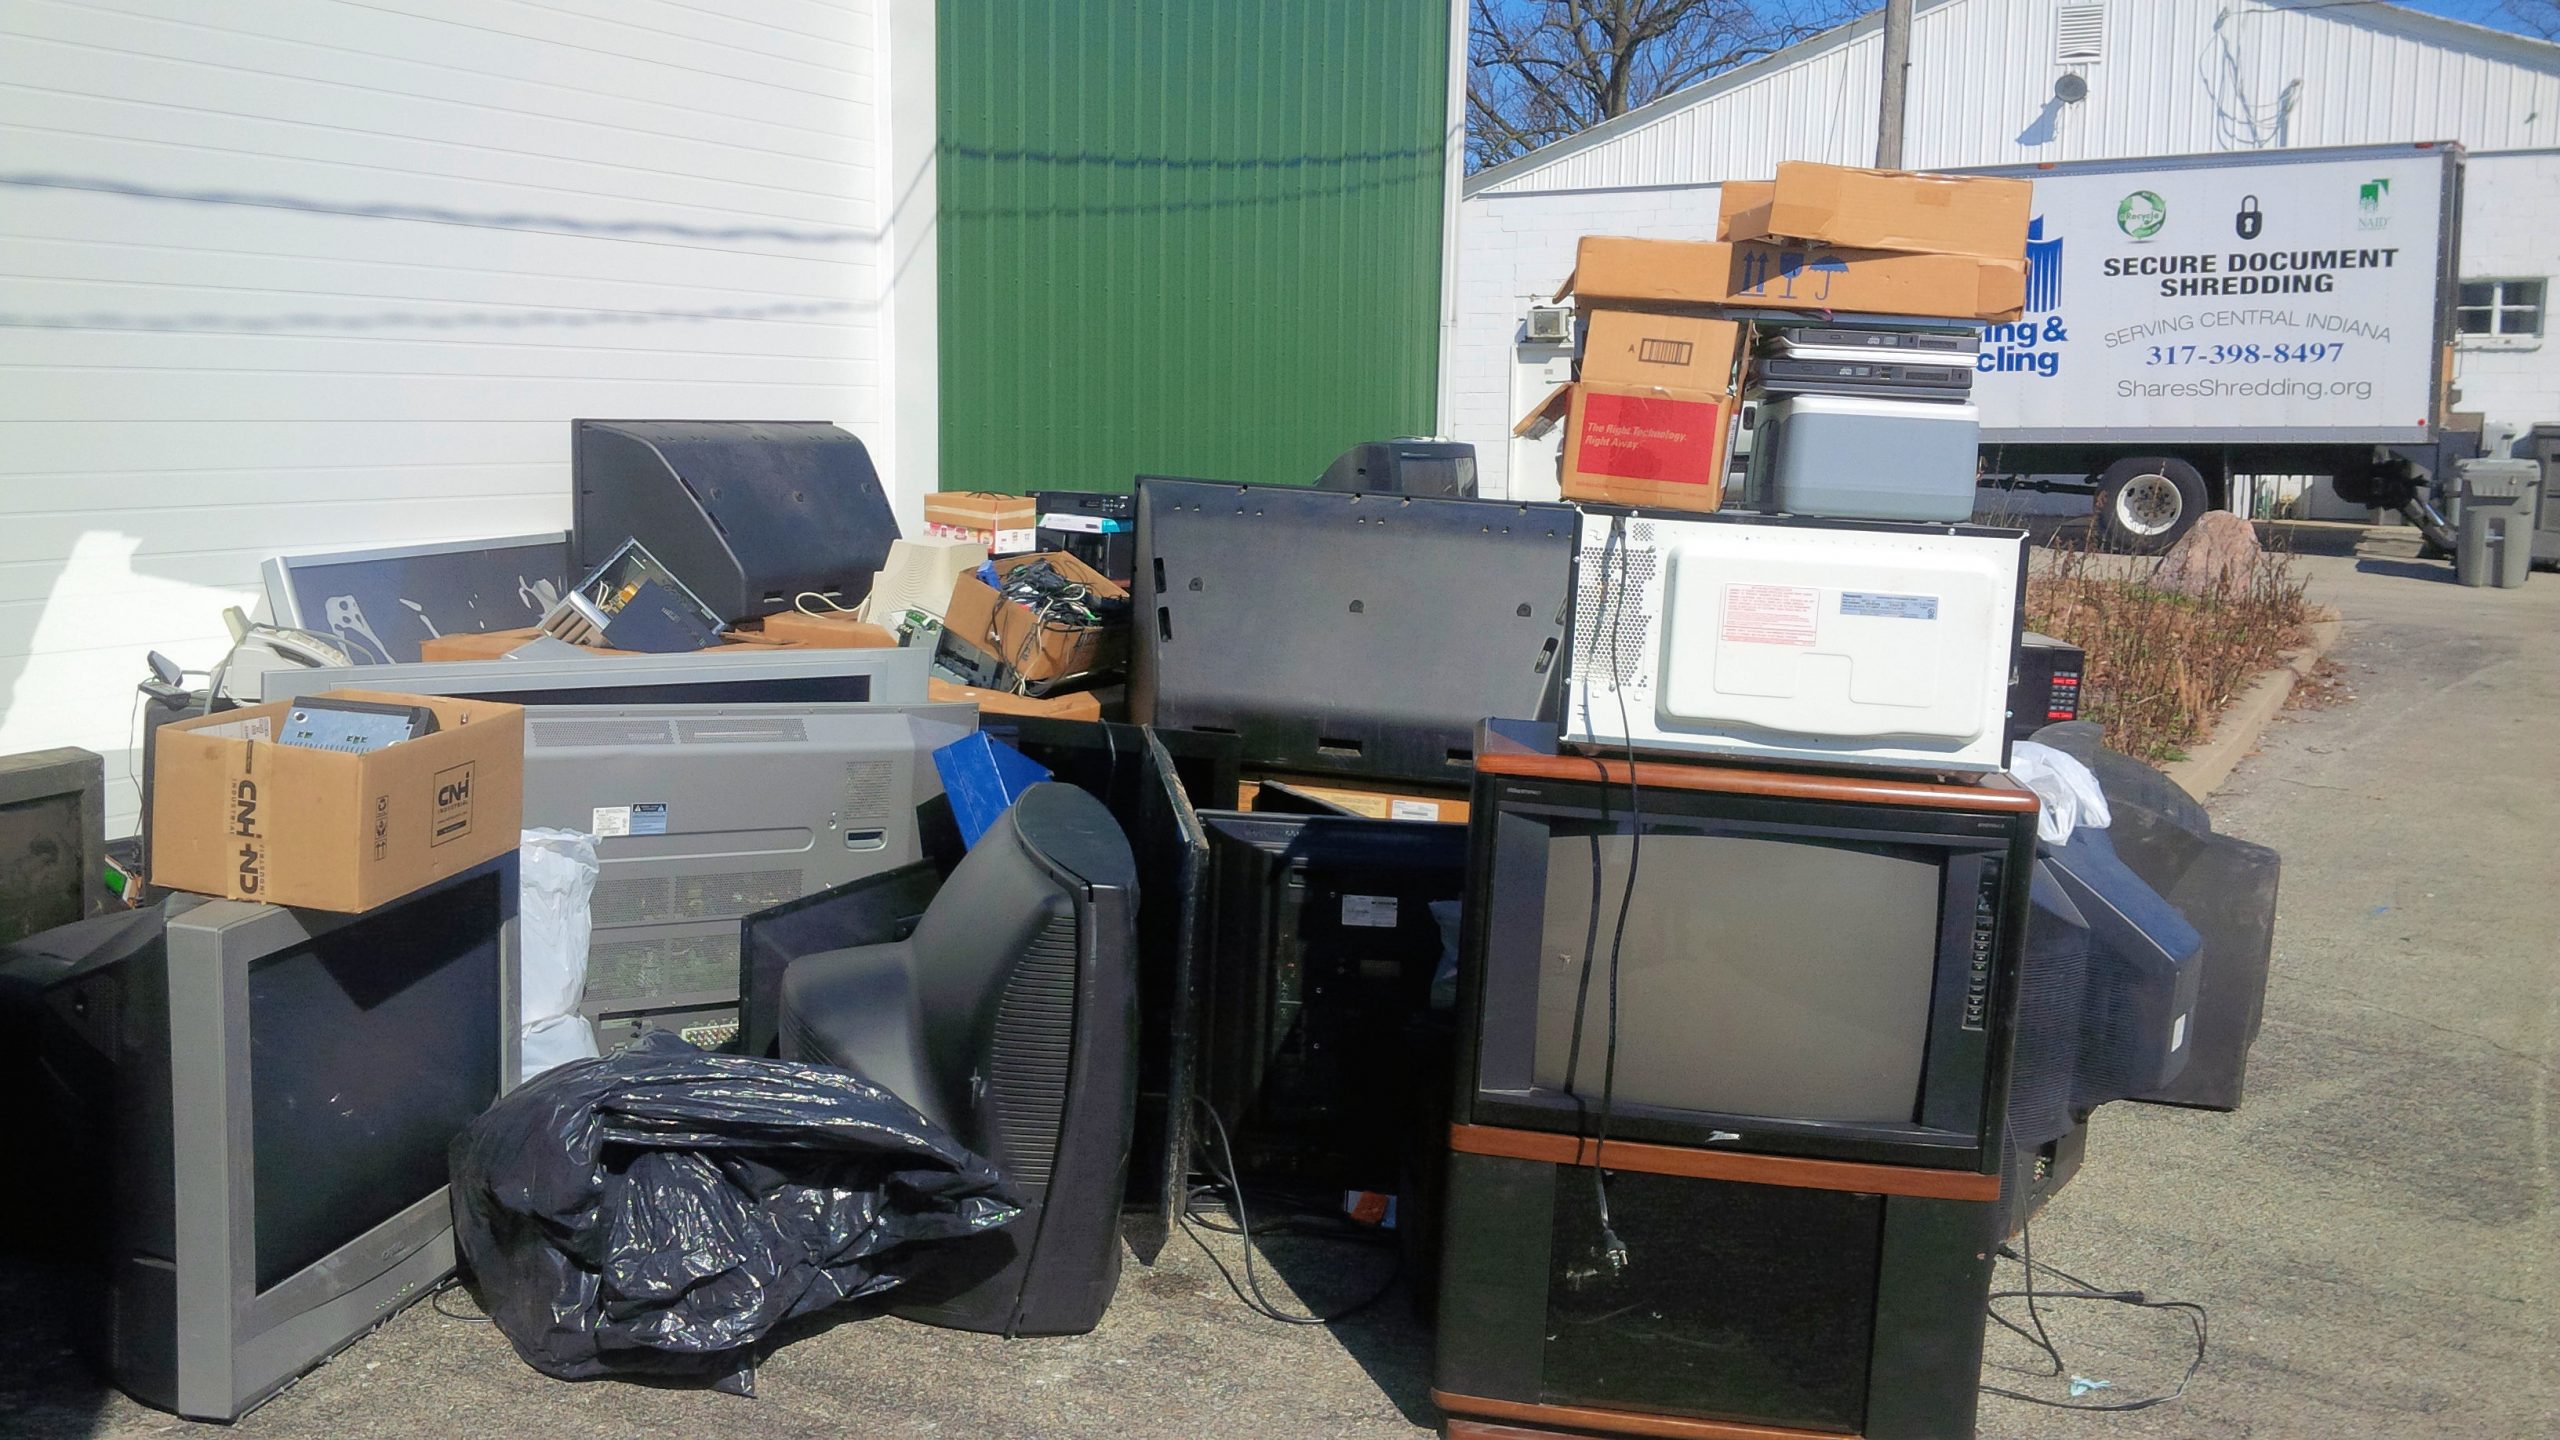 Old TVs and microwaves piled up